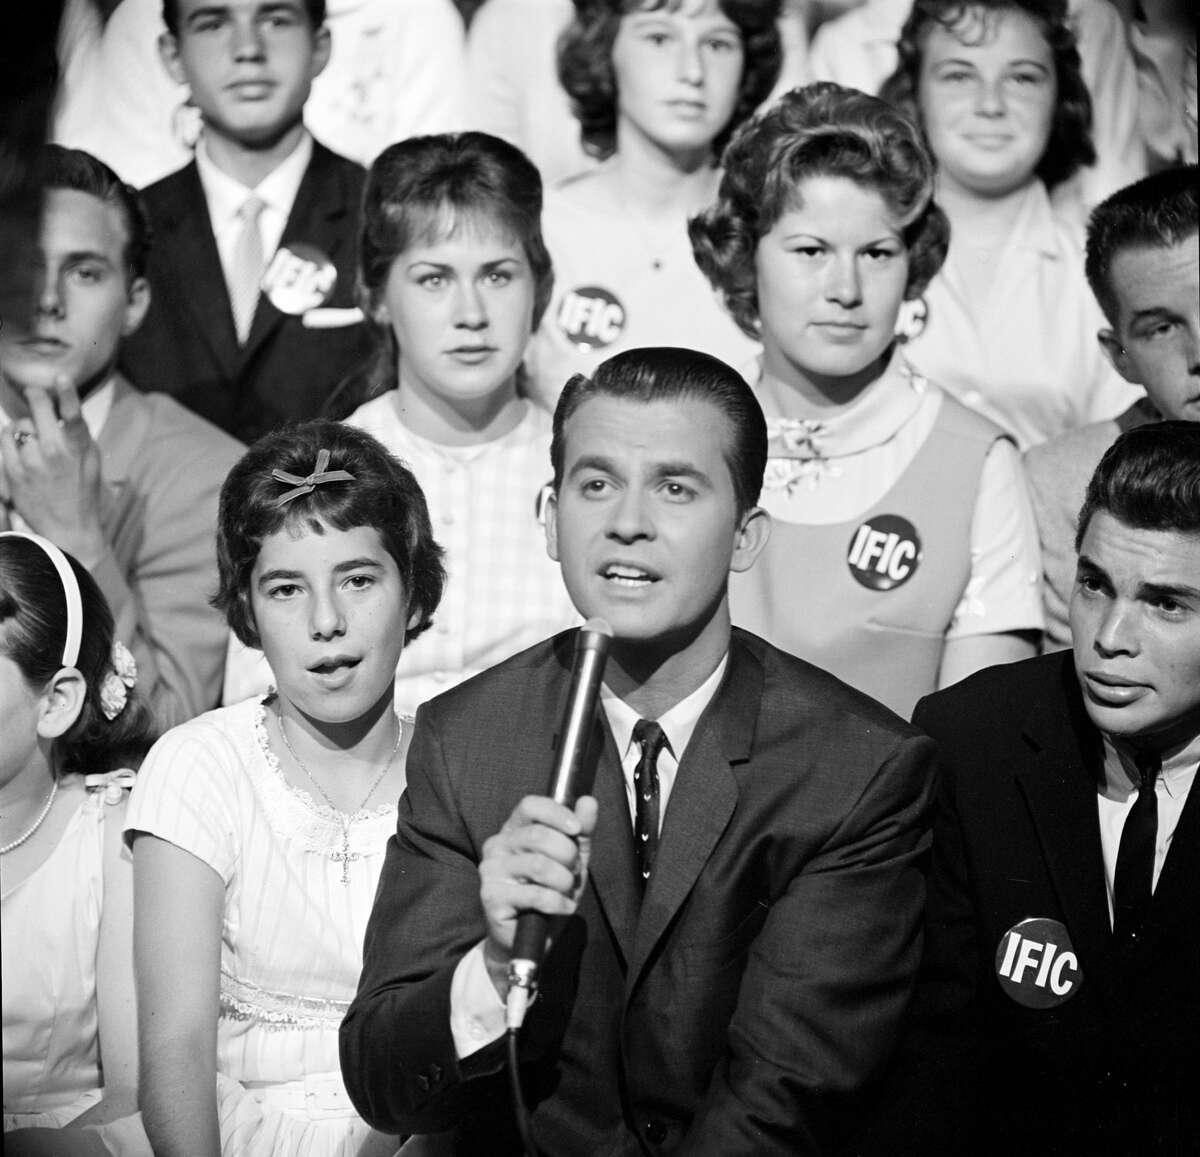 Dick Clark, "American Bandstand" Clark turned 31 in 1960 but he never looked much older than his teenage guests. He died in 2012.